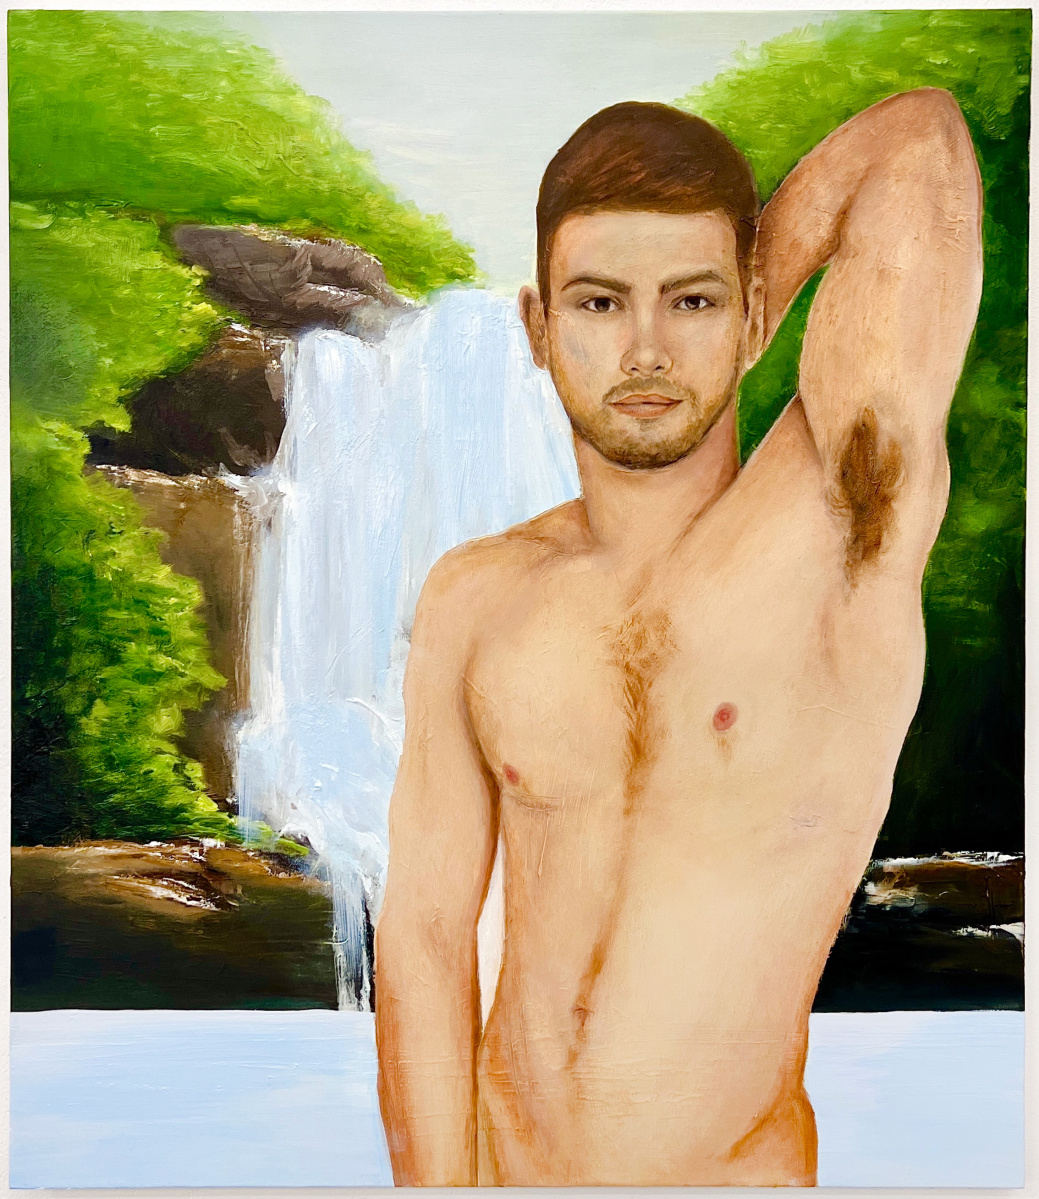 The image shows a painting of porn star Johnny Rapid, pictured from the waist up with his left arm raised and reaching behind his head exposing his armpit, in front of a waterfall.